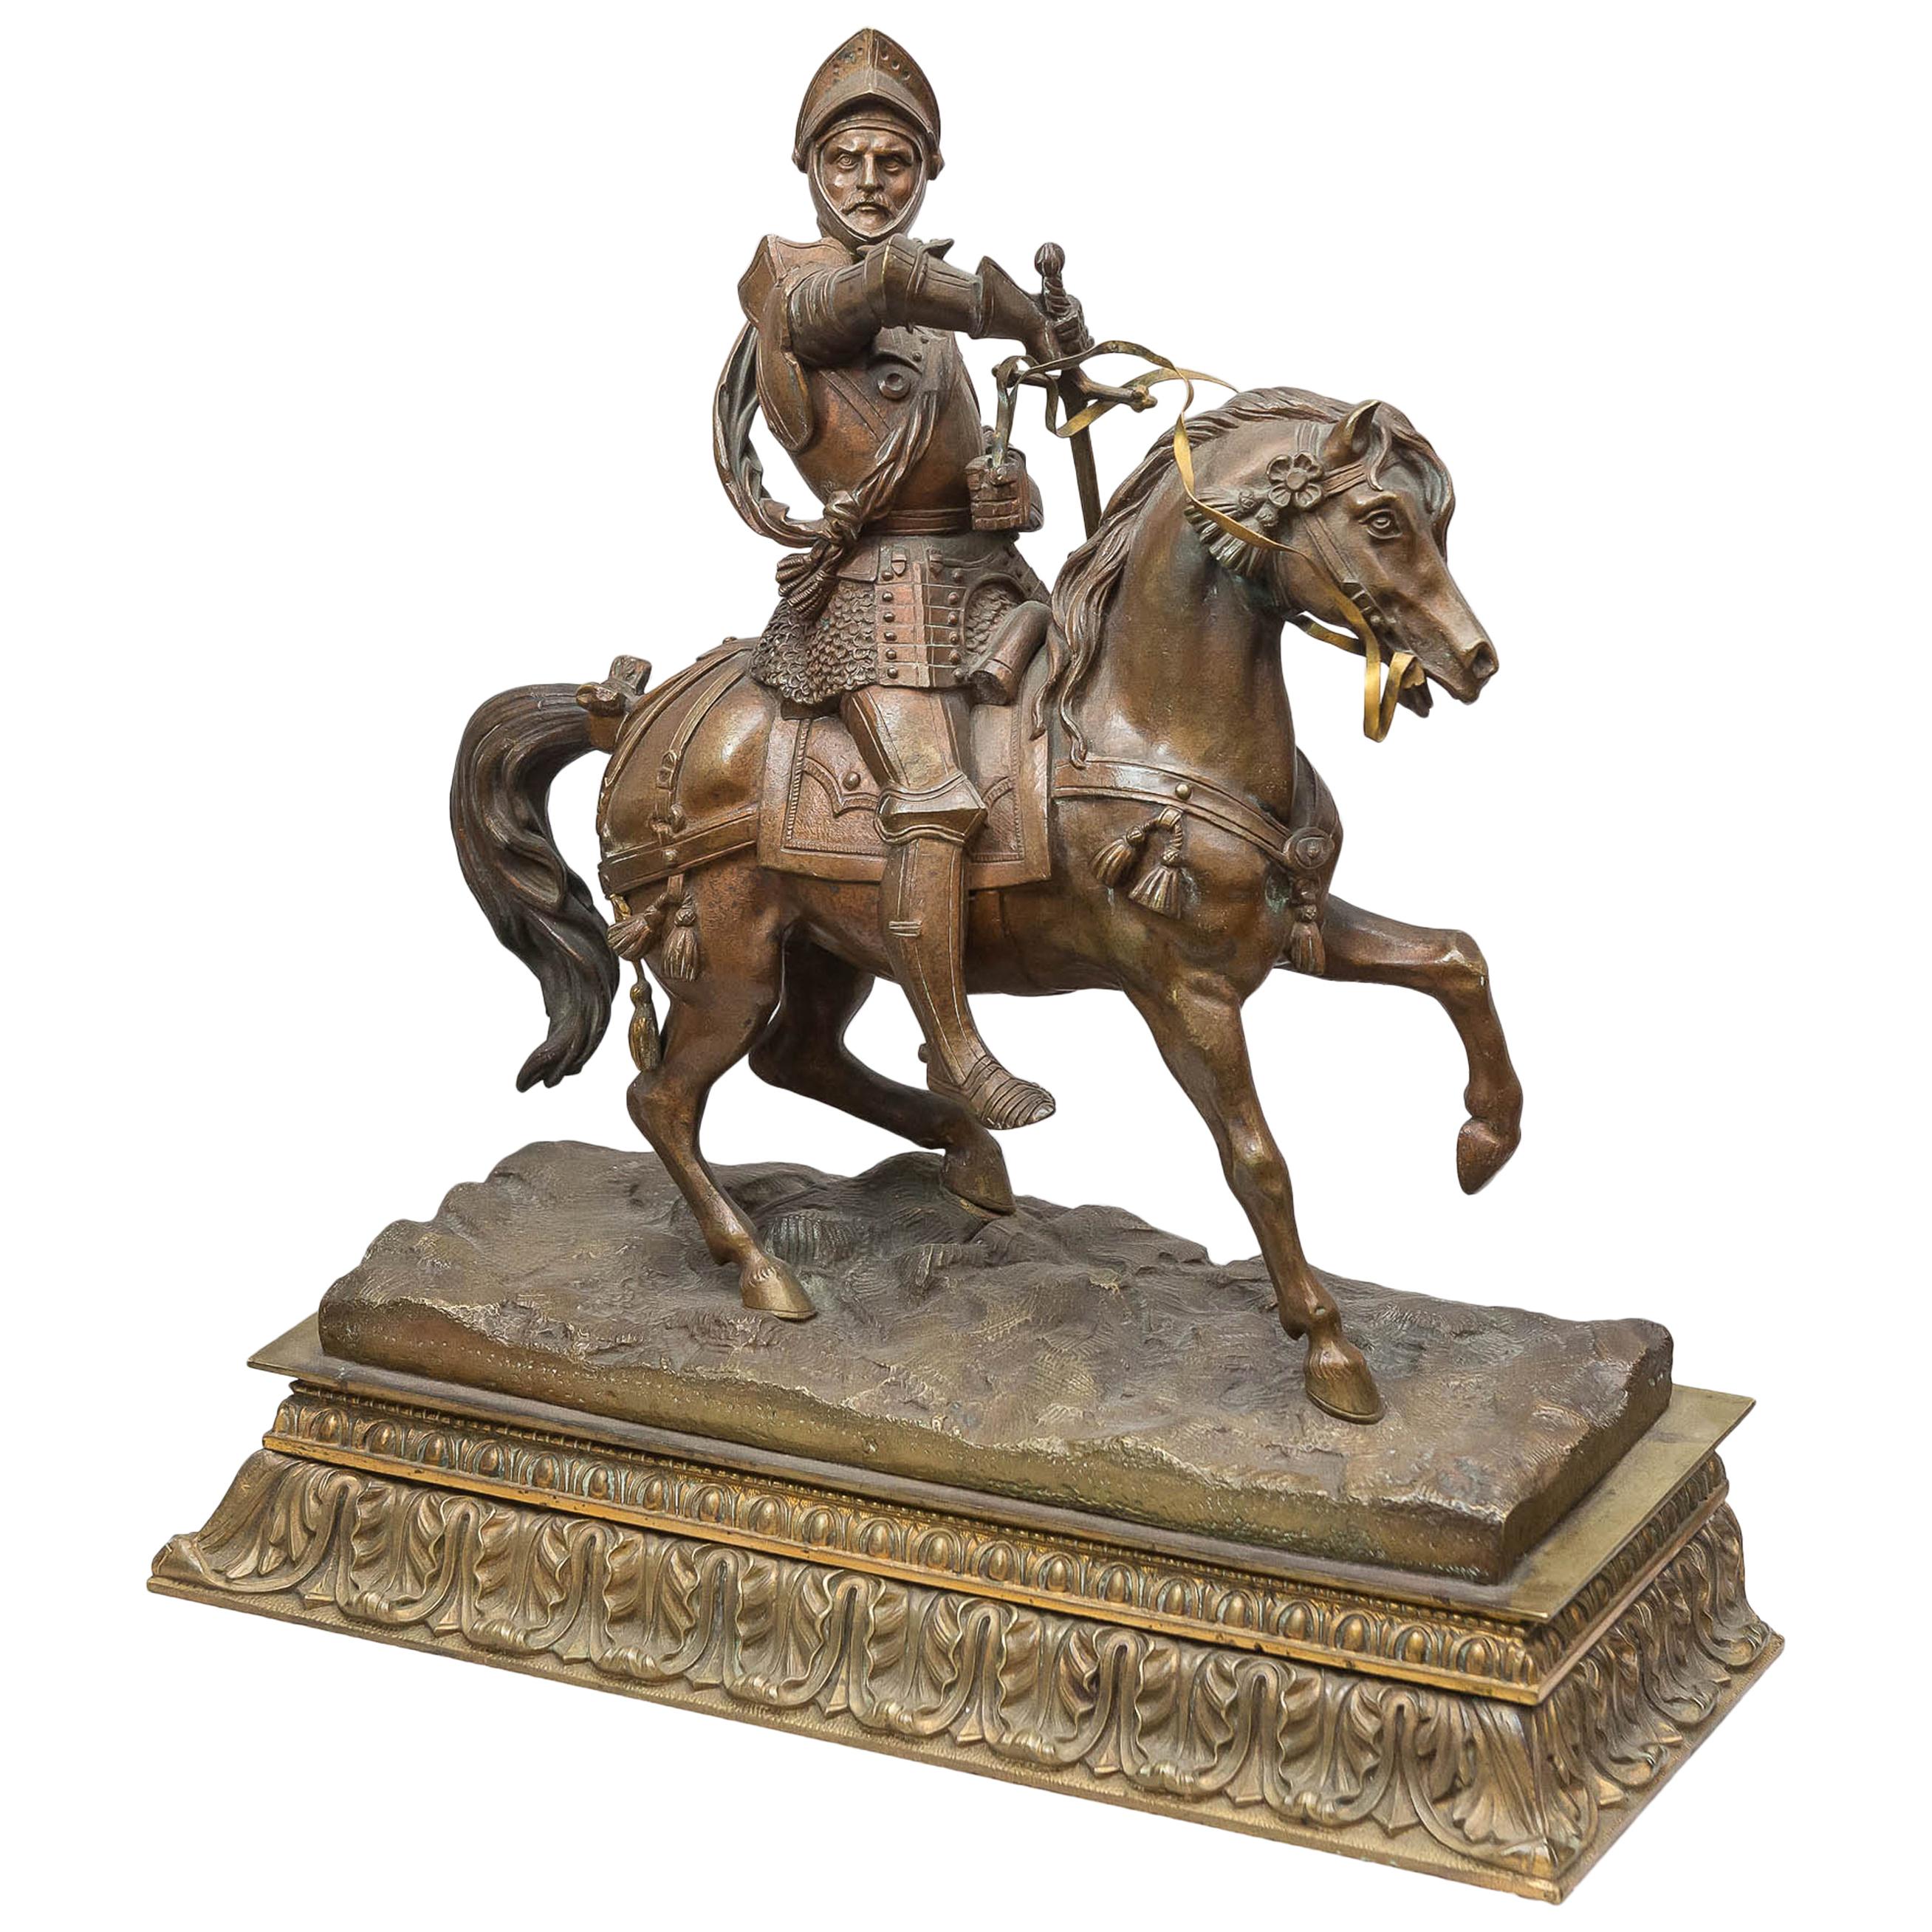 Antique Bronze Figure of a Knight on a Horse